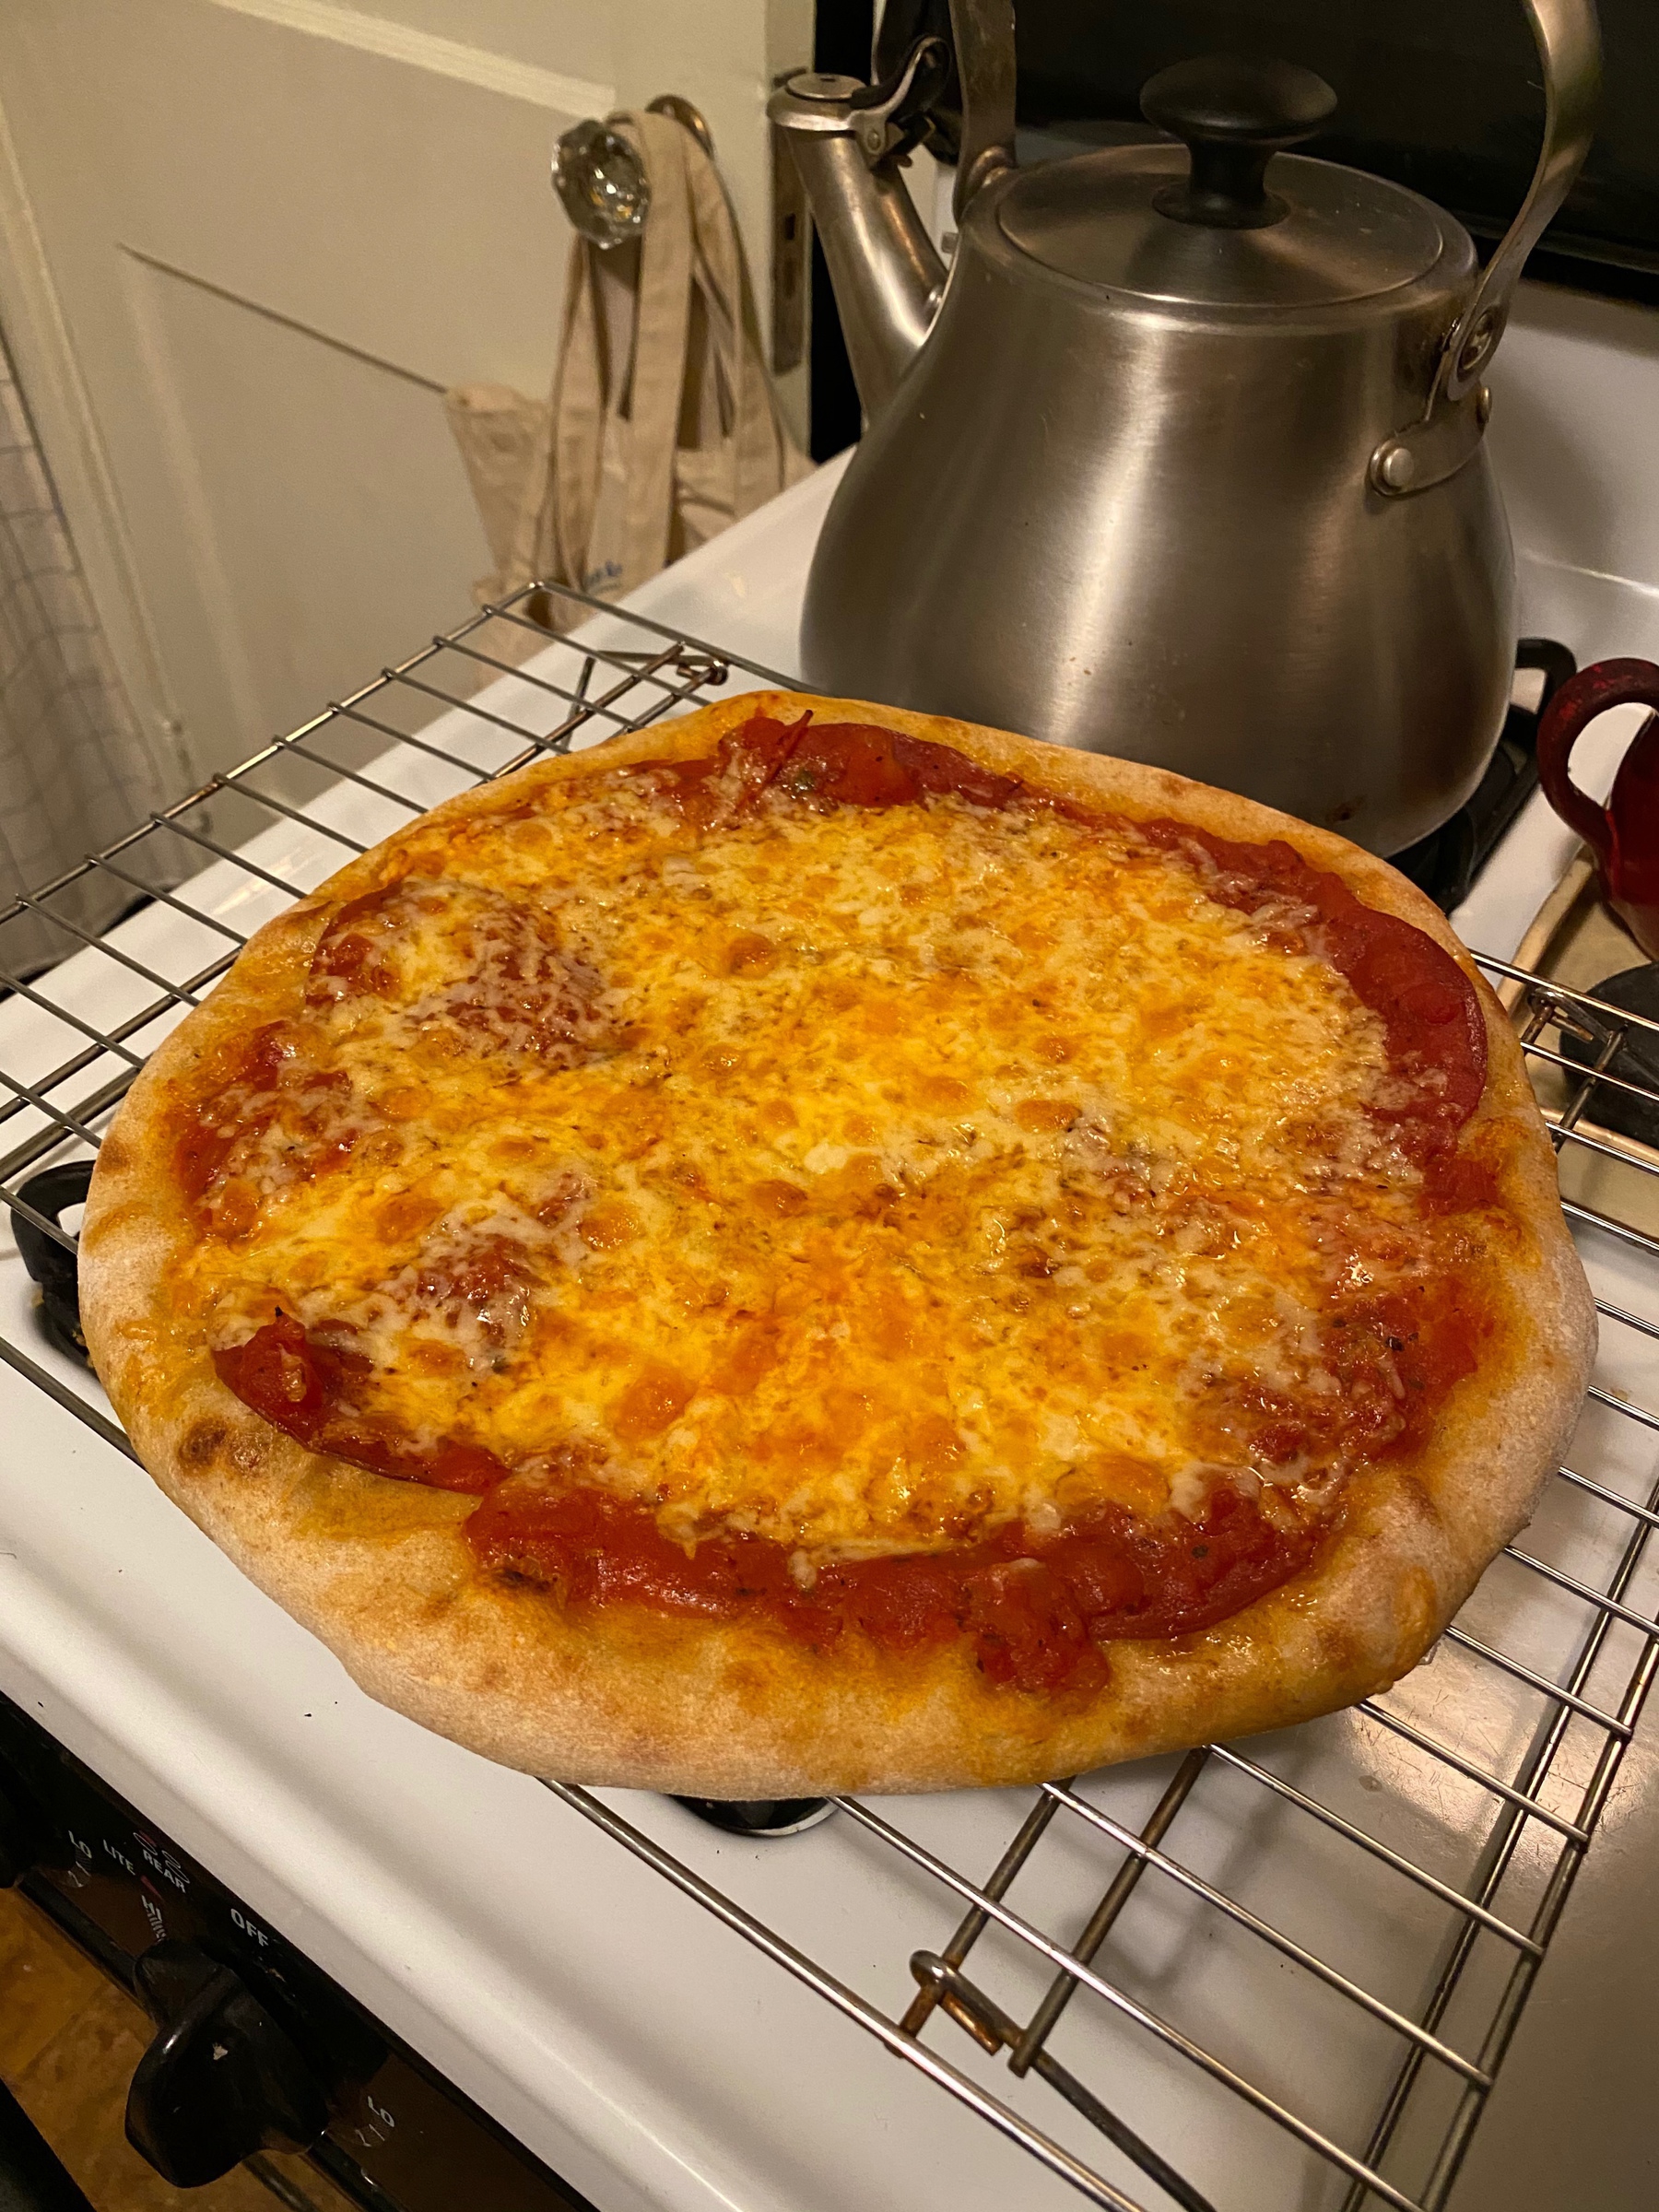 A small pizza on a cooling rack on a stove with a kettle in the background.